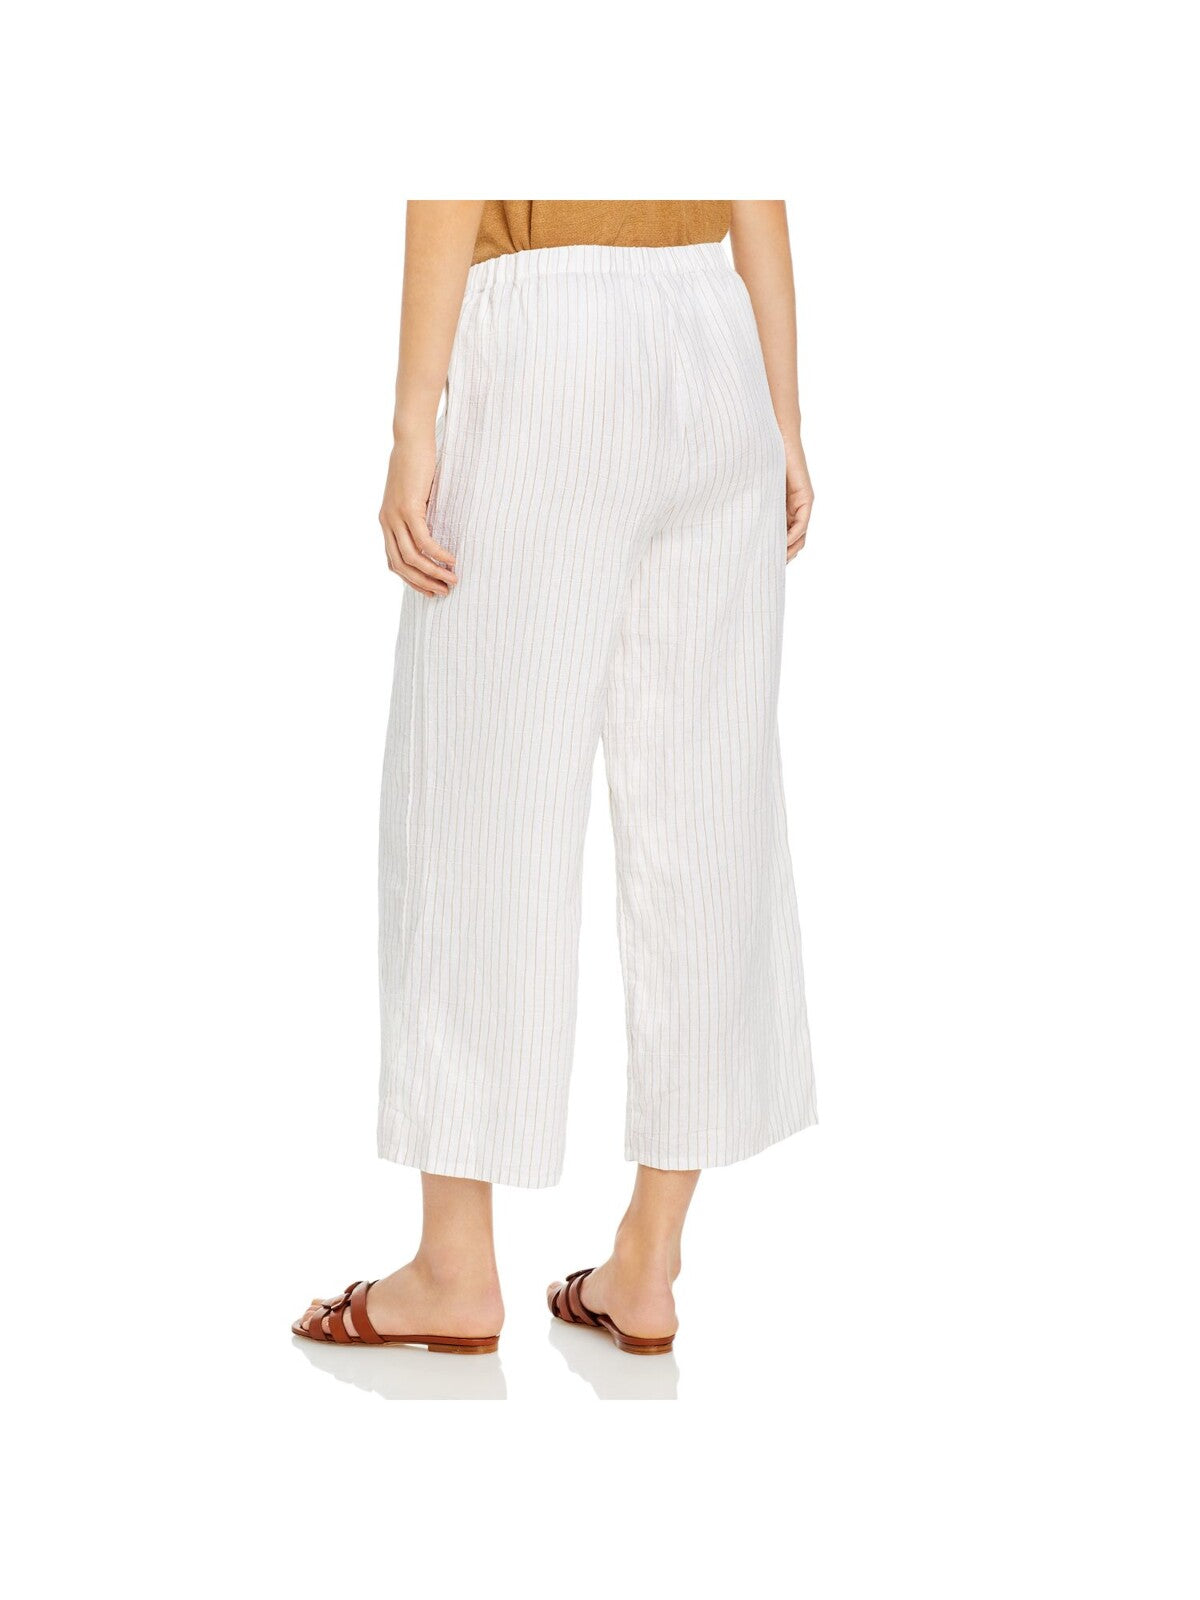 EILEEN FISHER Womens White Pocketed Elastic Waist Pull On Pinstripe Cropped Pants XS